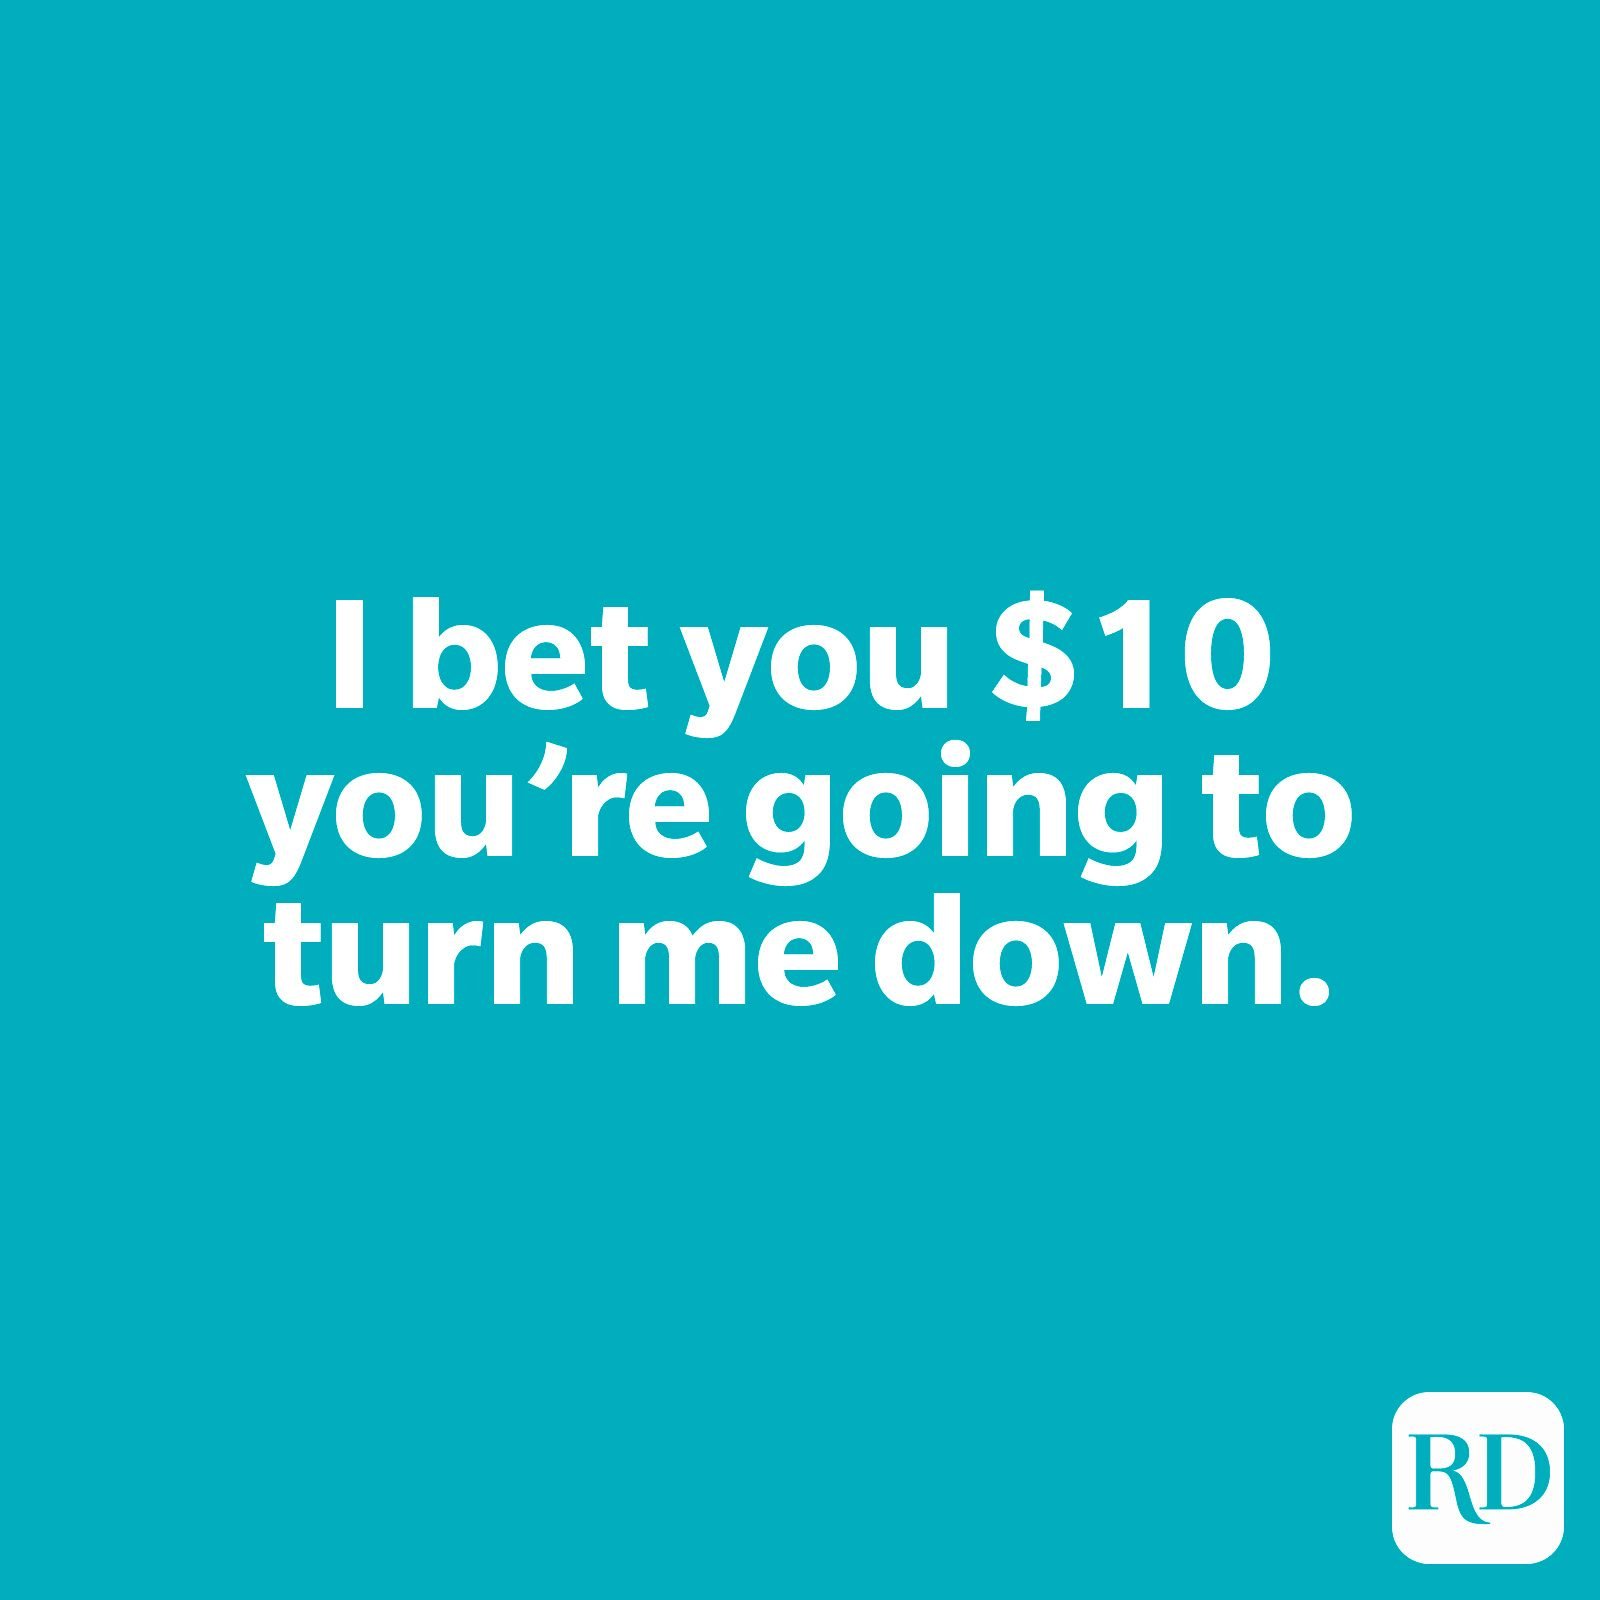 I bet you $10 you’re going to turn me down.